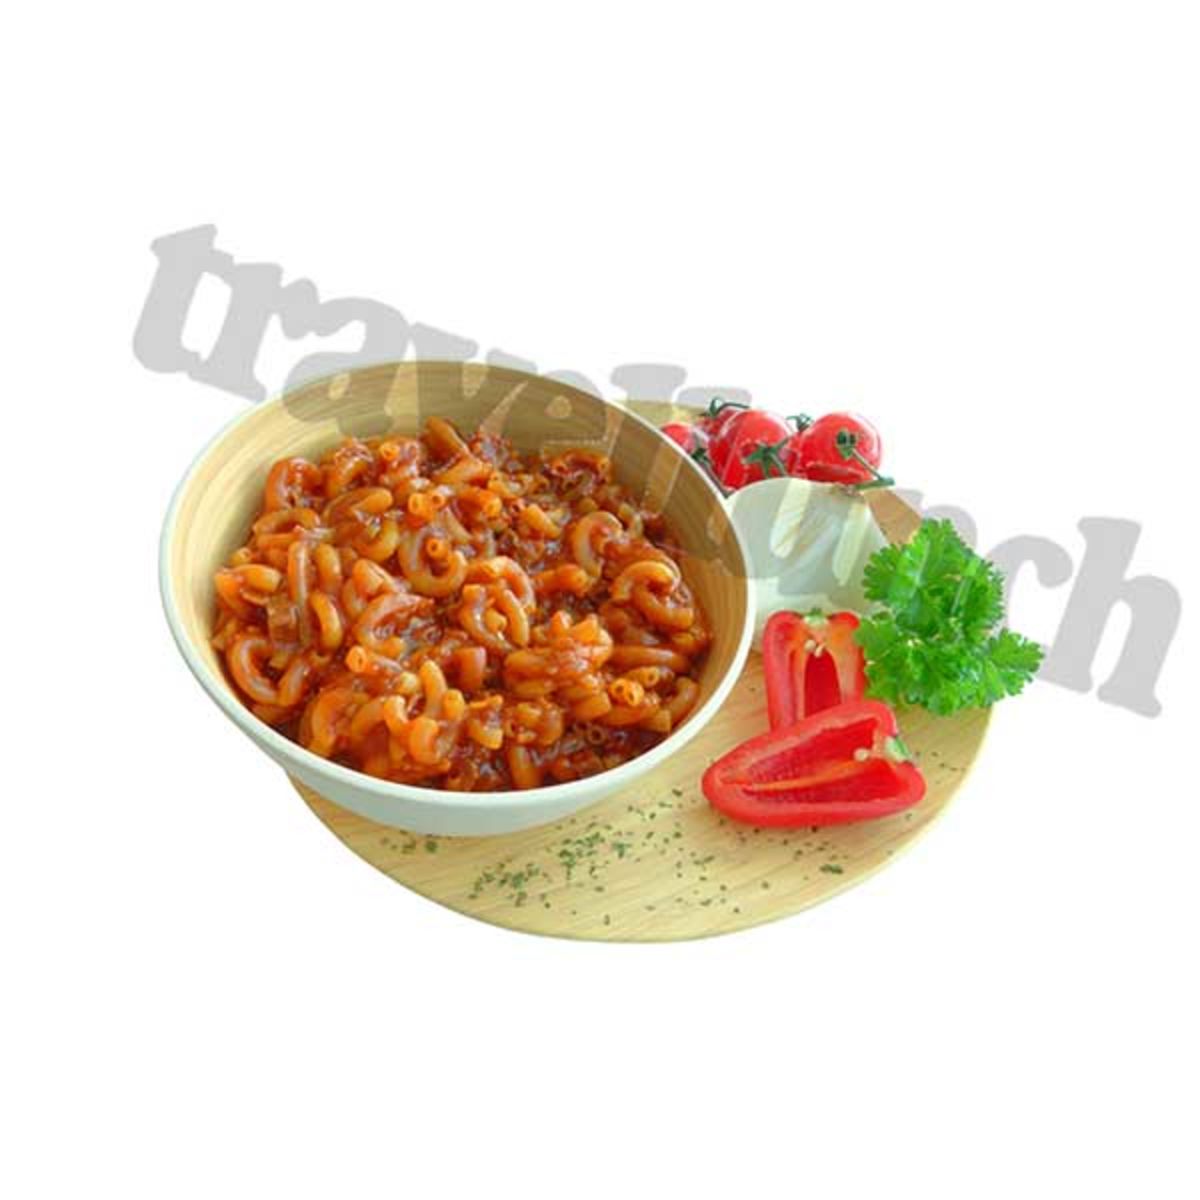 Pasta with beef and pepper sauce - Double serving